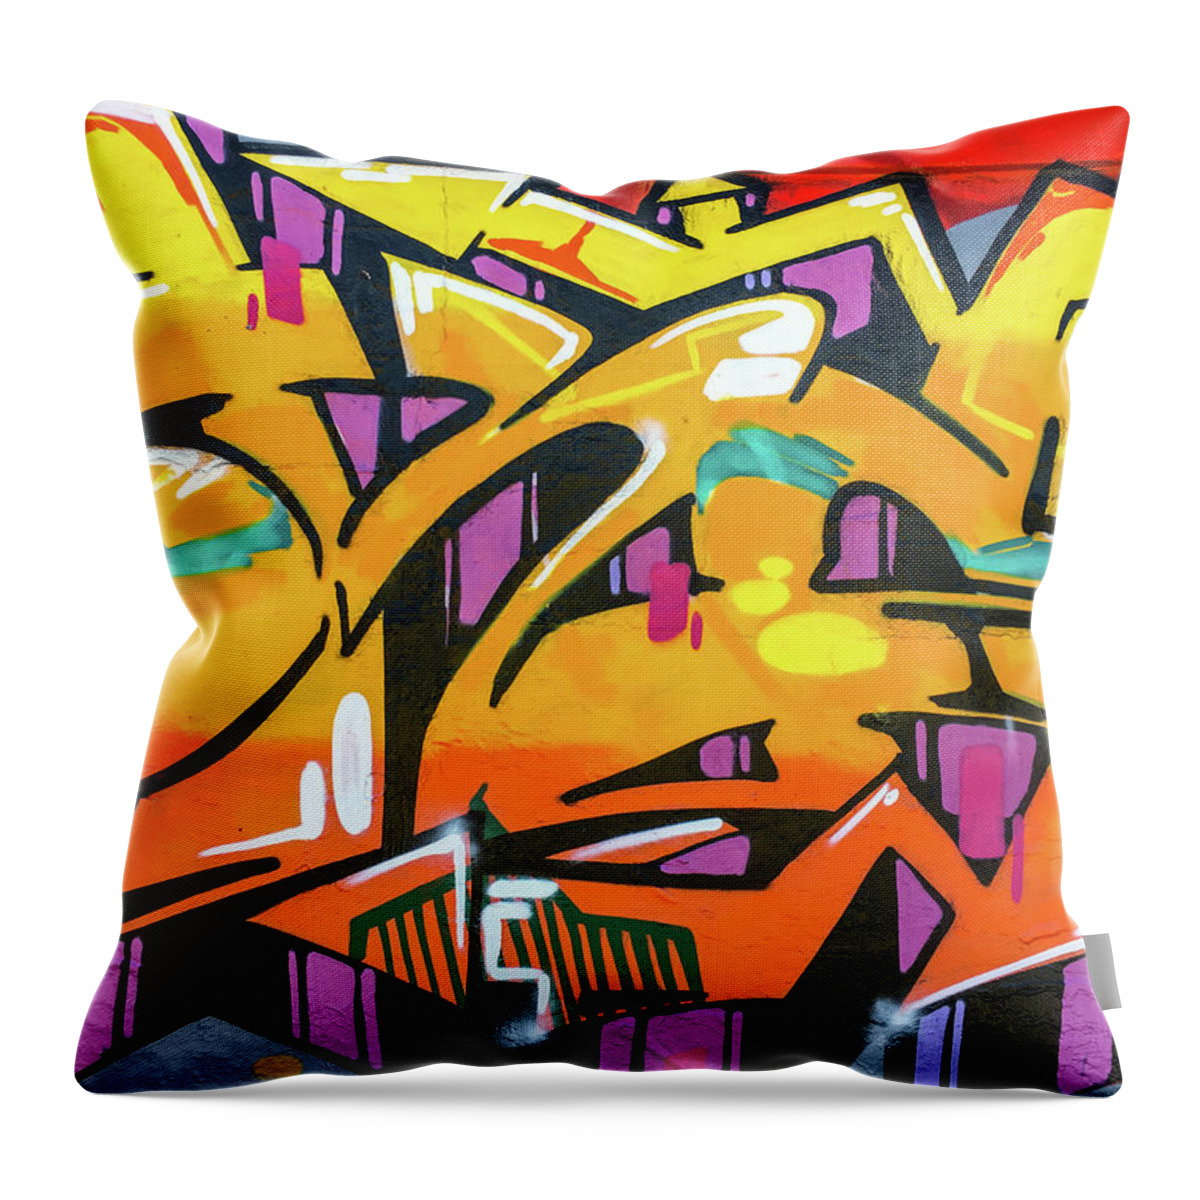 Abstract Throw Pillow featuring the photograph Orange Lettering Urban Art by SR Green